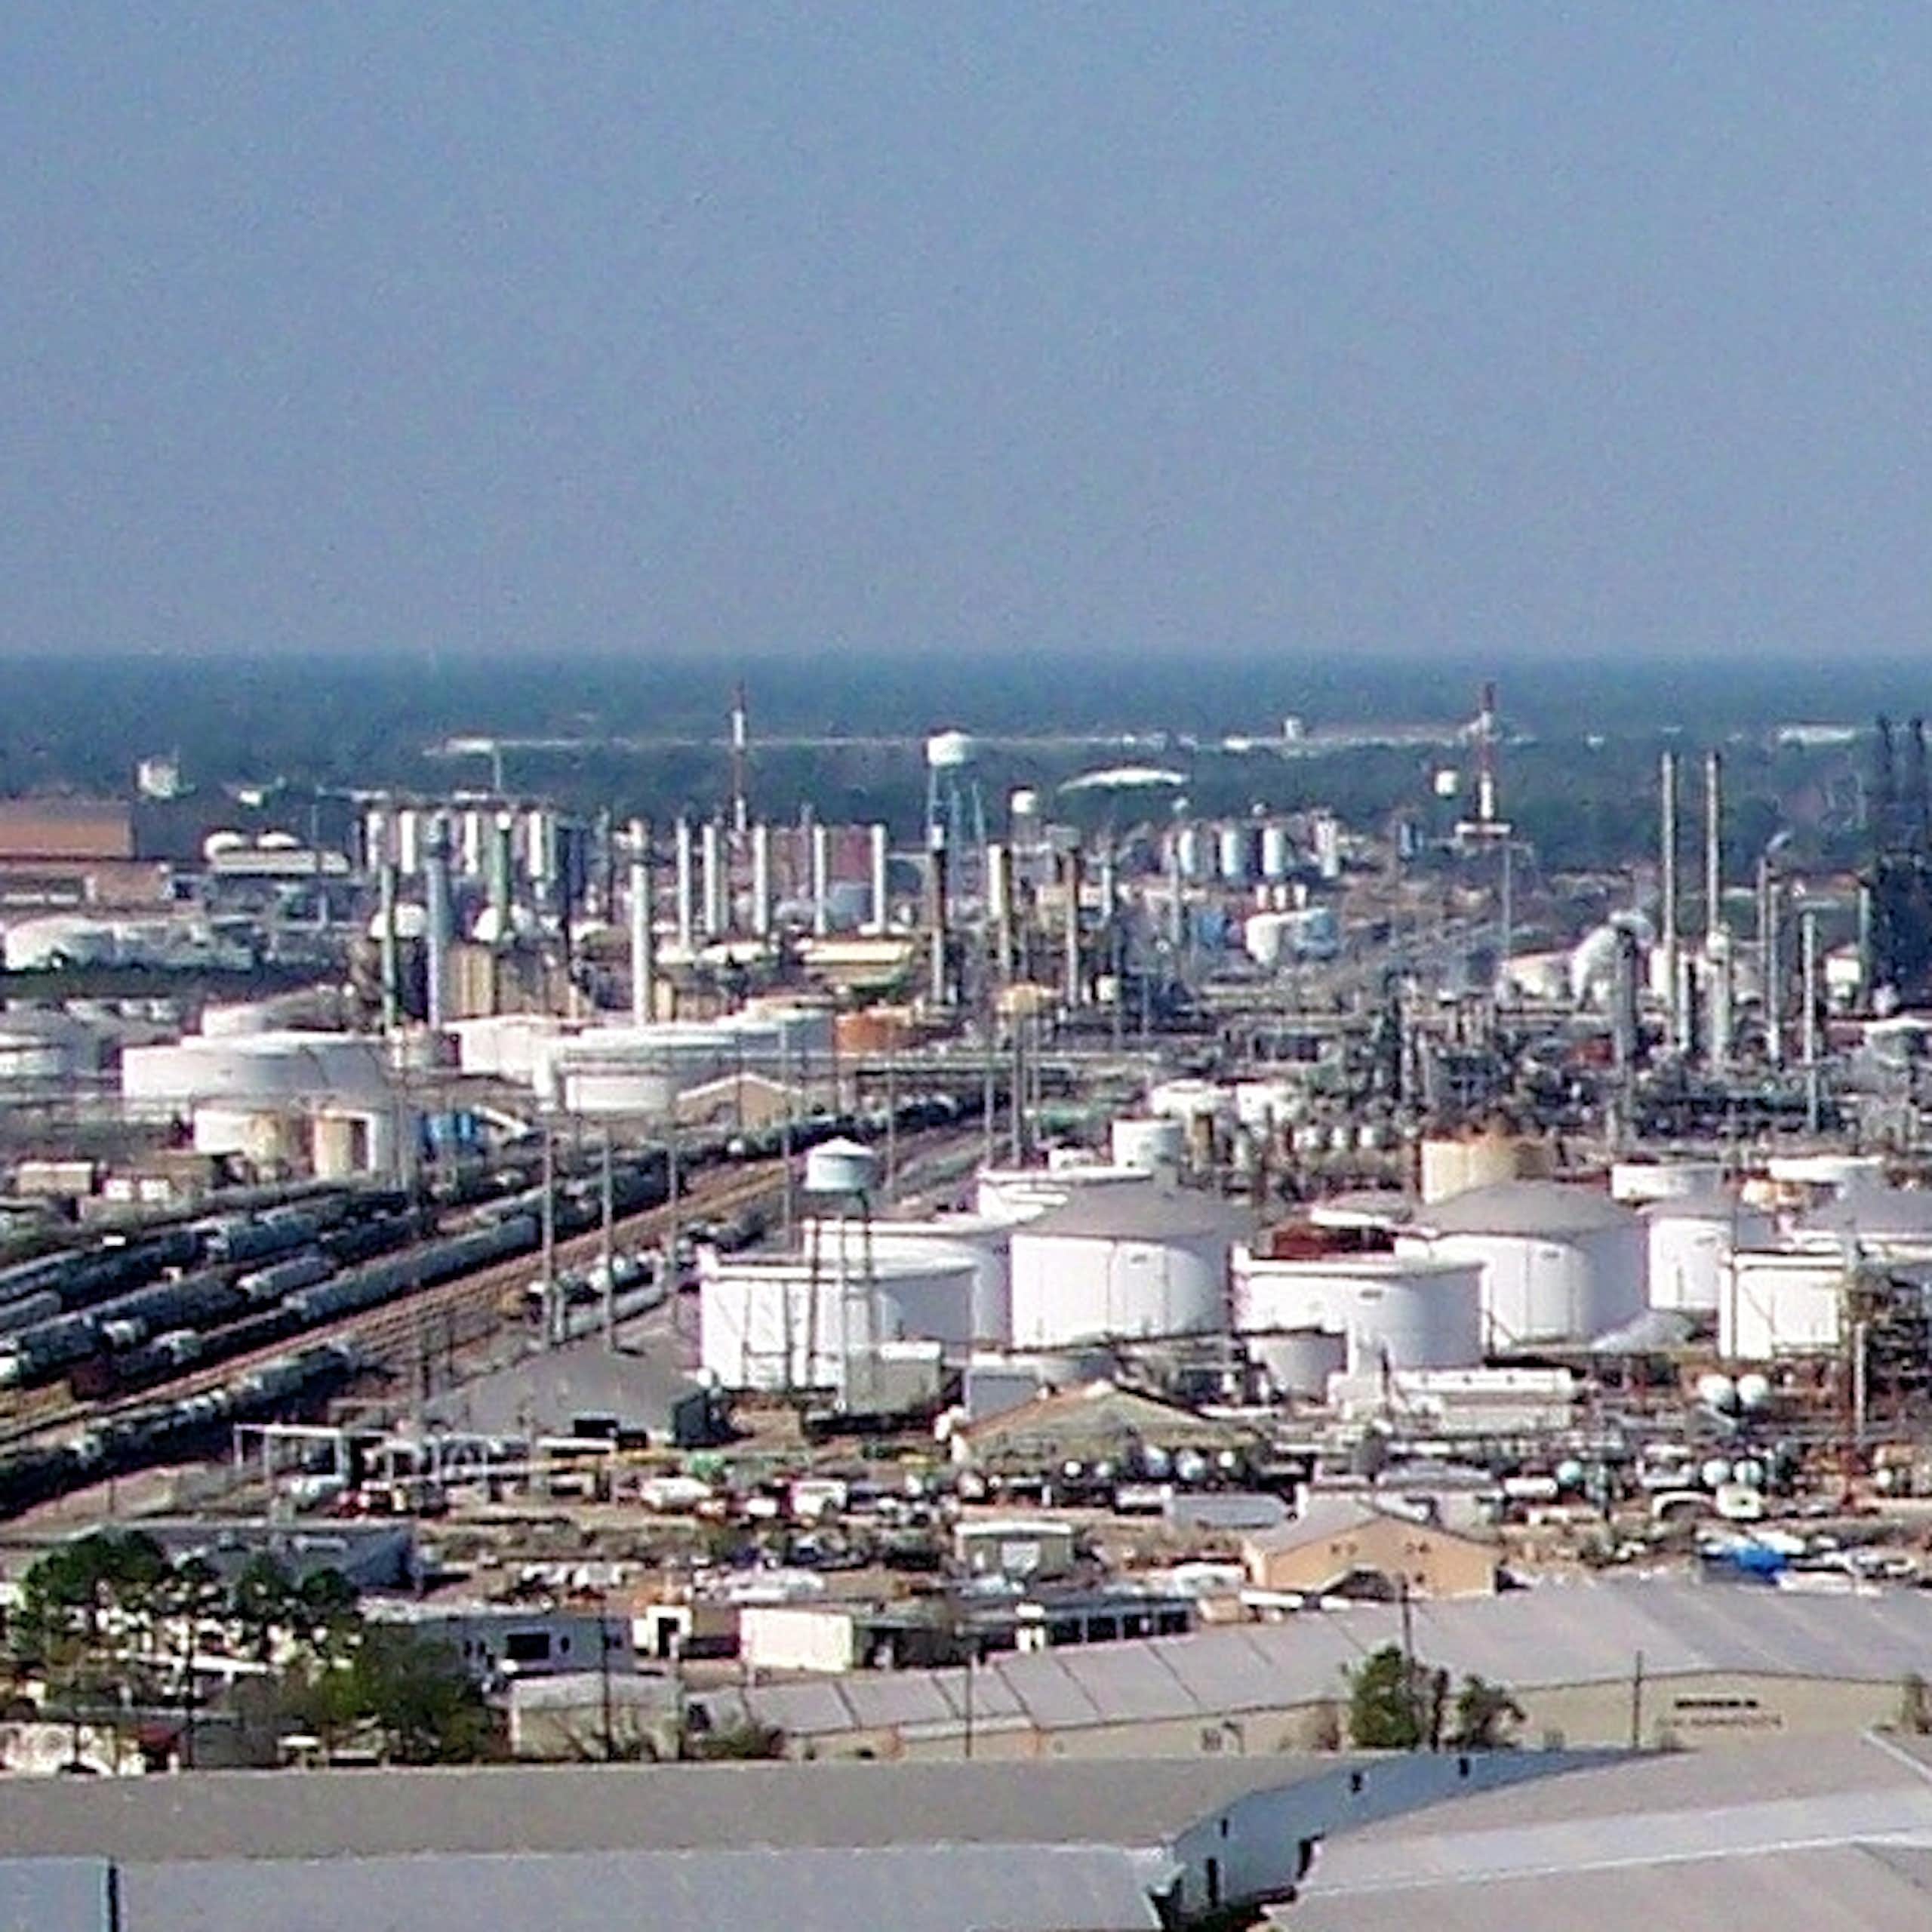 The view of the Exxon refinery from the state capitol.